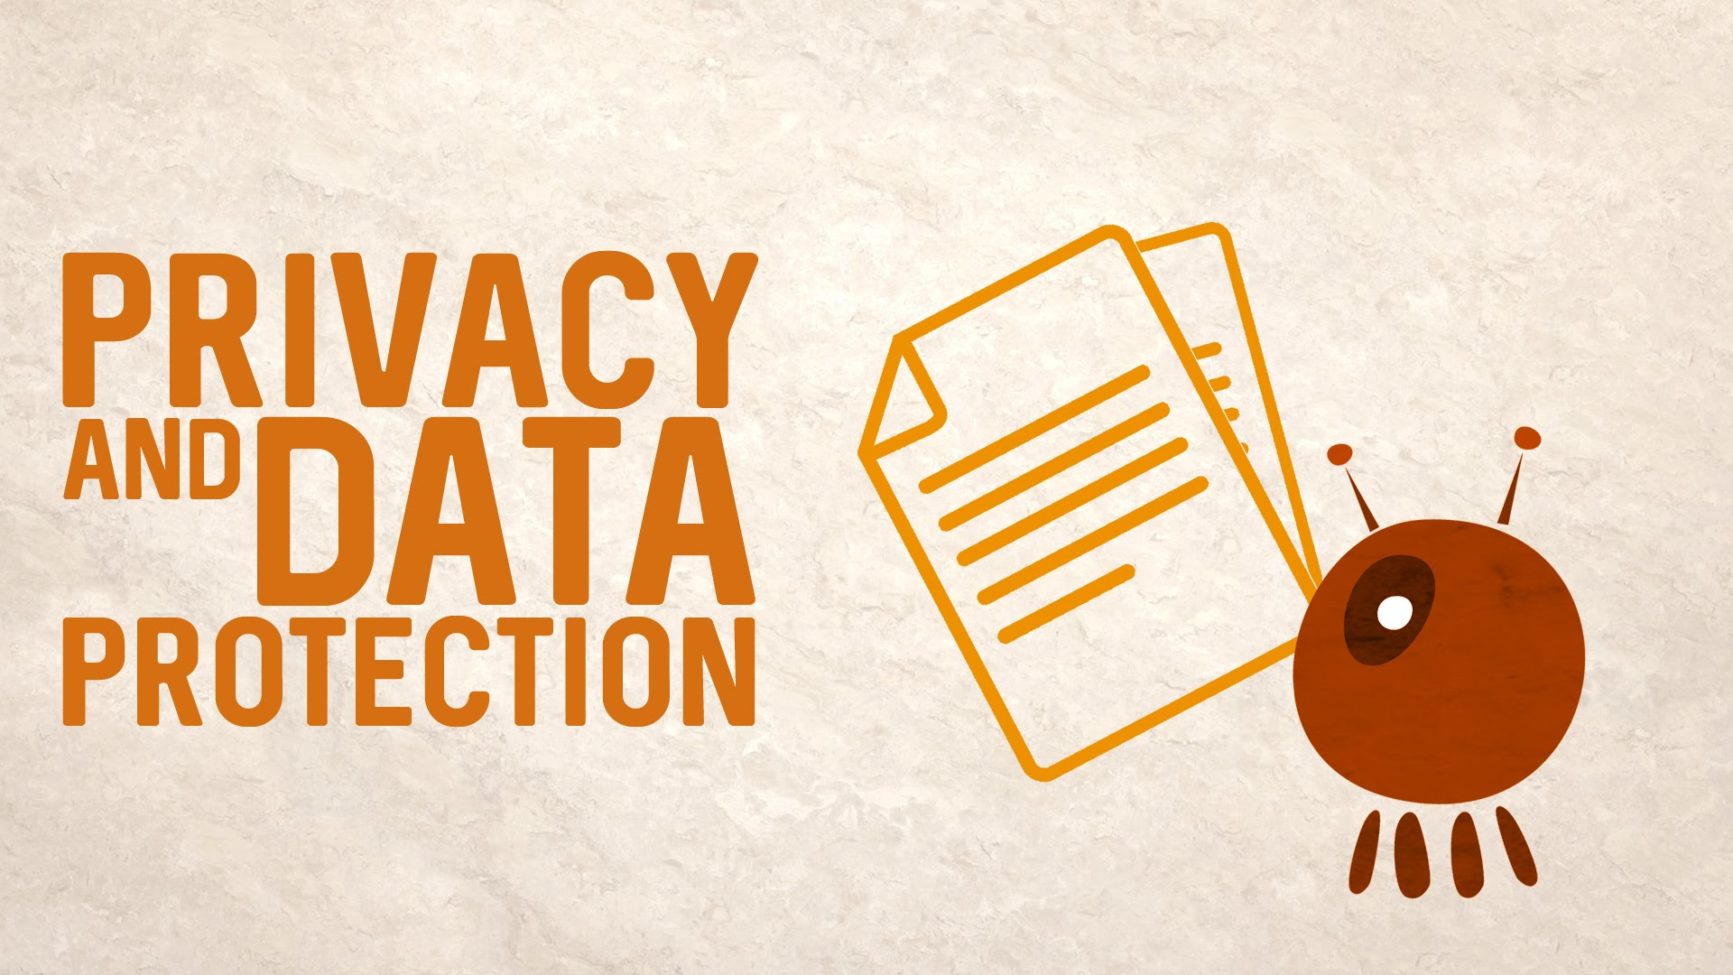 data privacy and protection